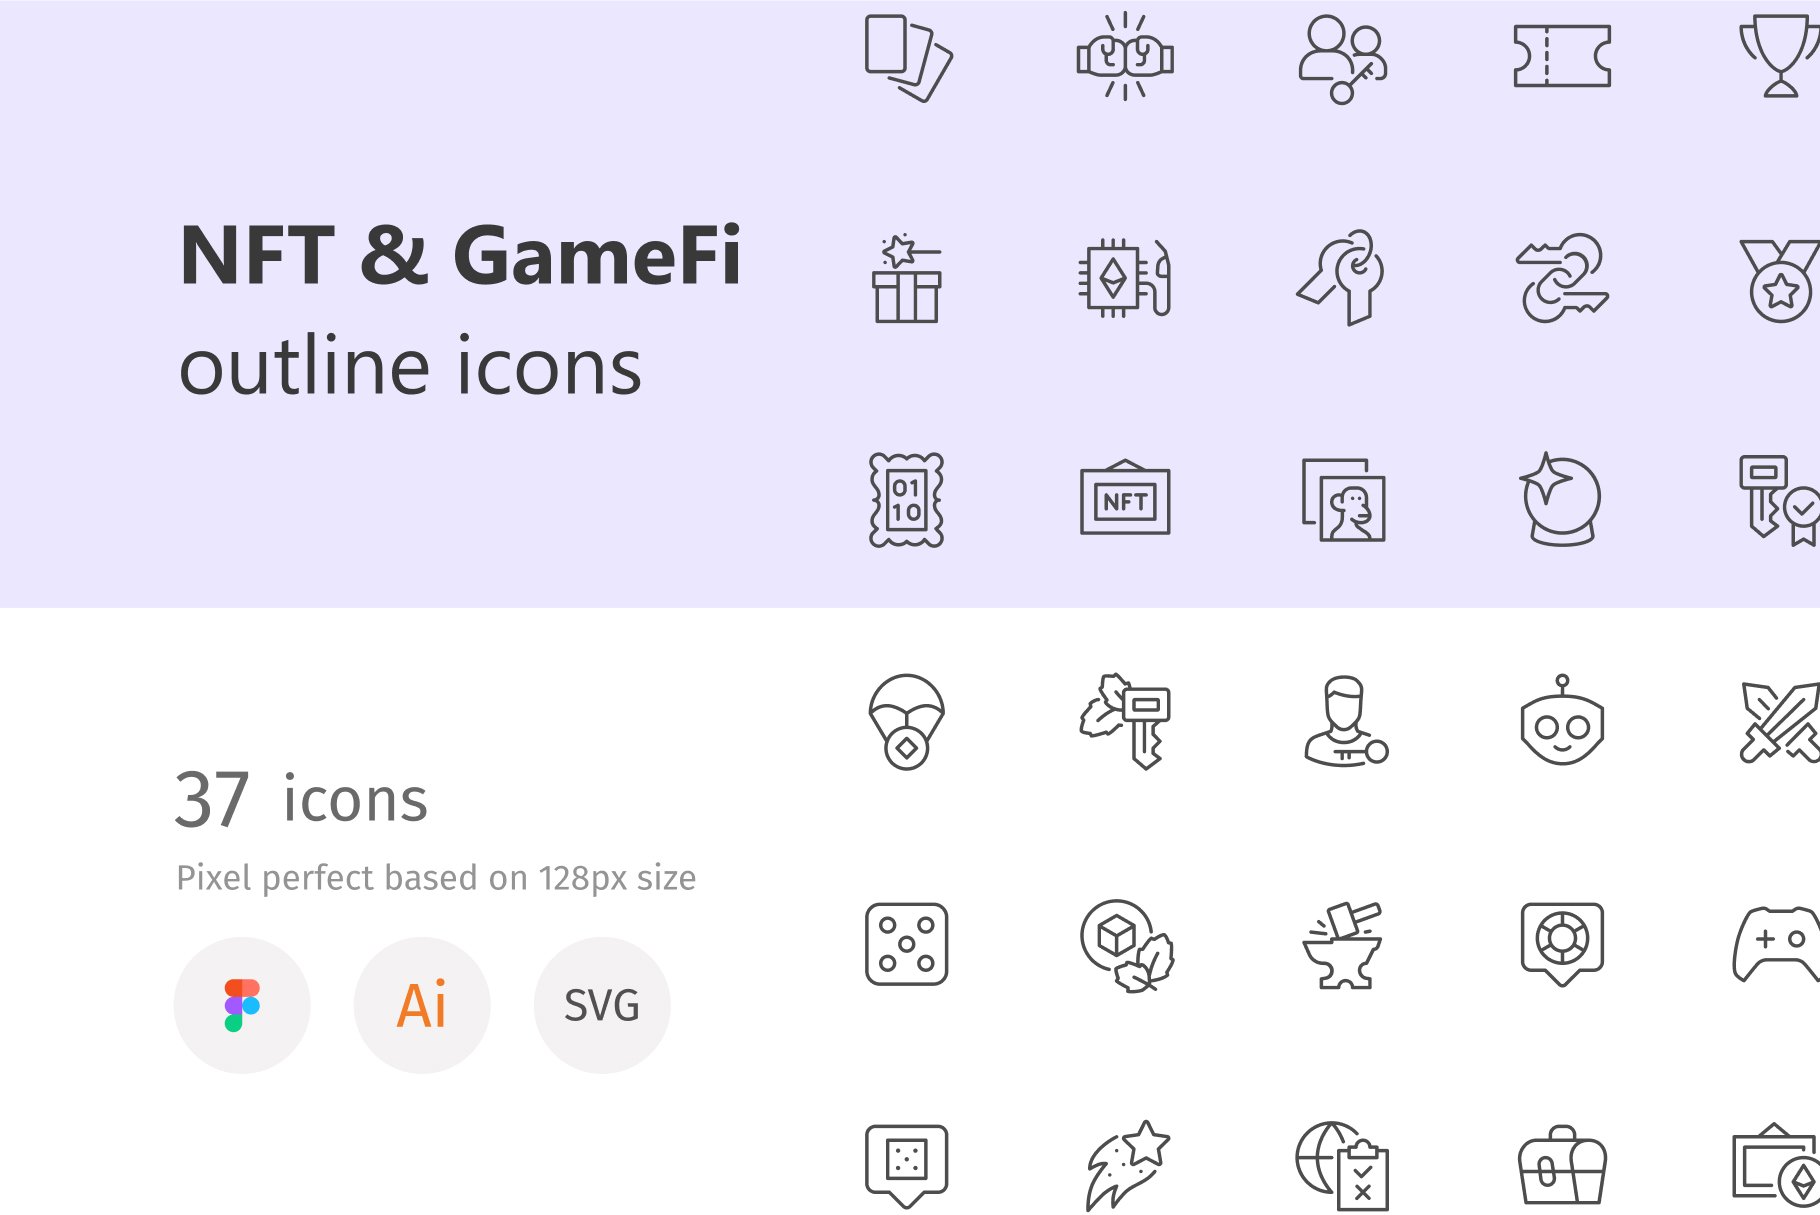 NFT & GameFi outline icons cover image.